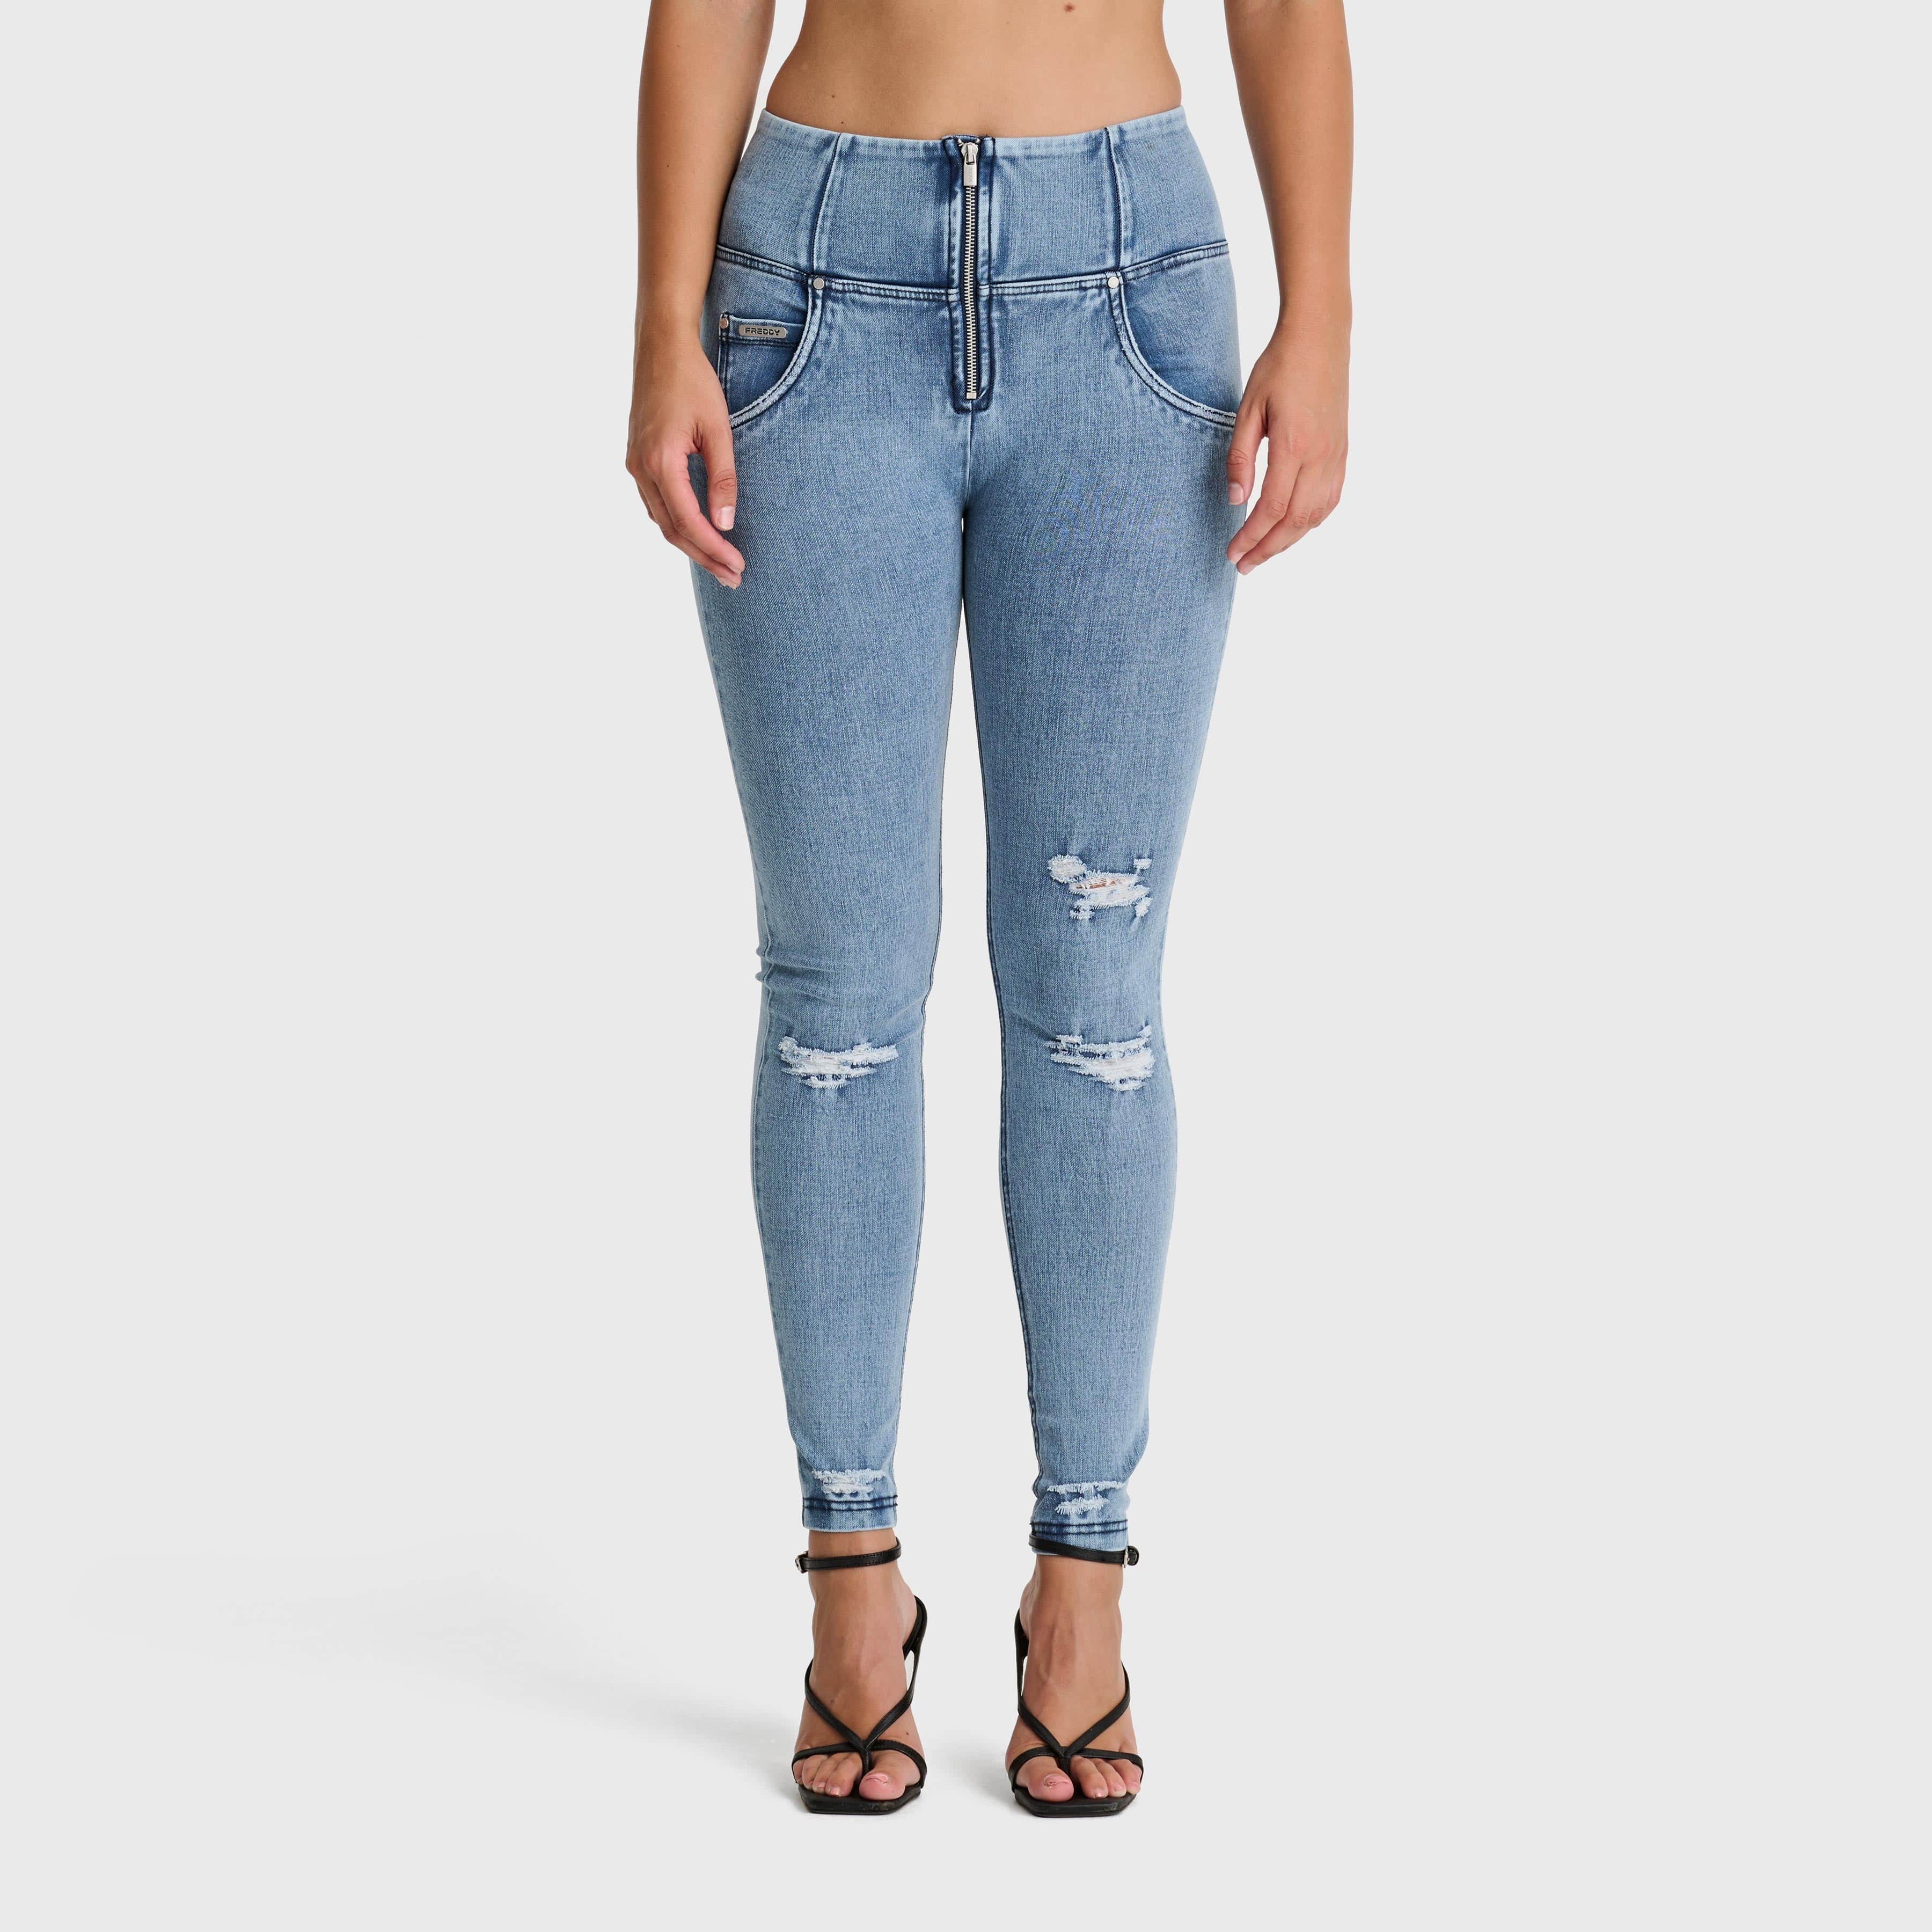 WR.UP® Snug Distressed Jeans - High Waisted - Full Length - Light Blue + Blue Stitching 2